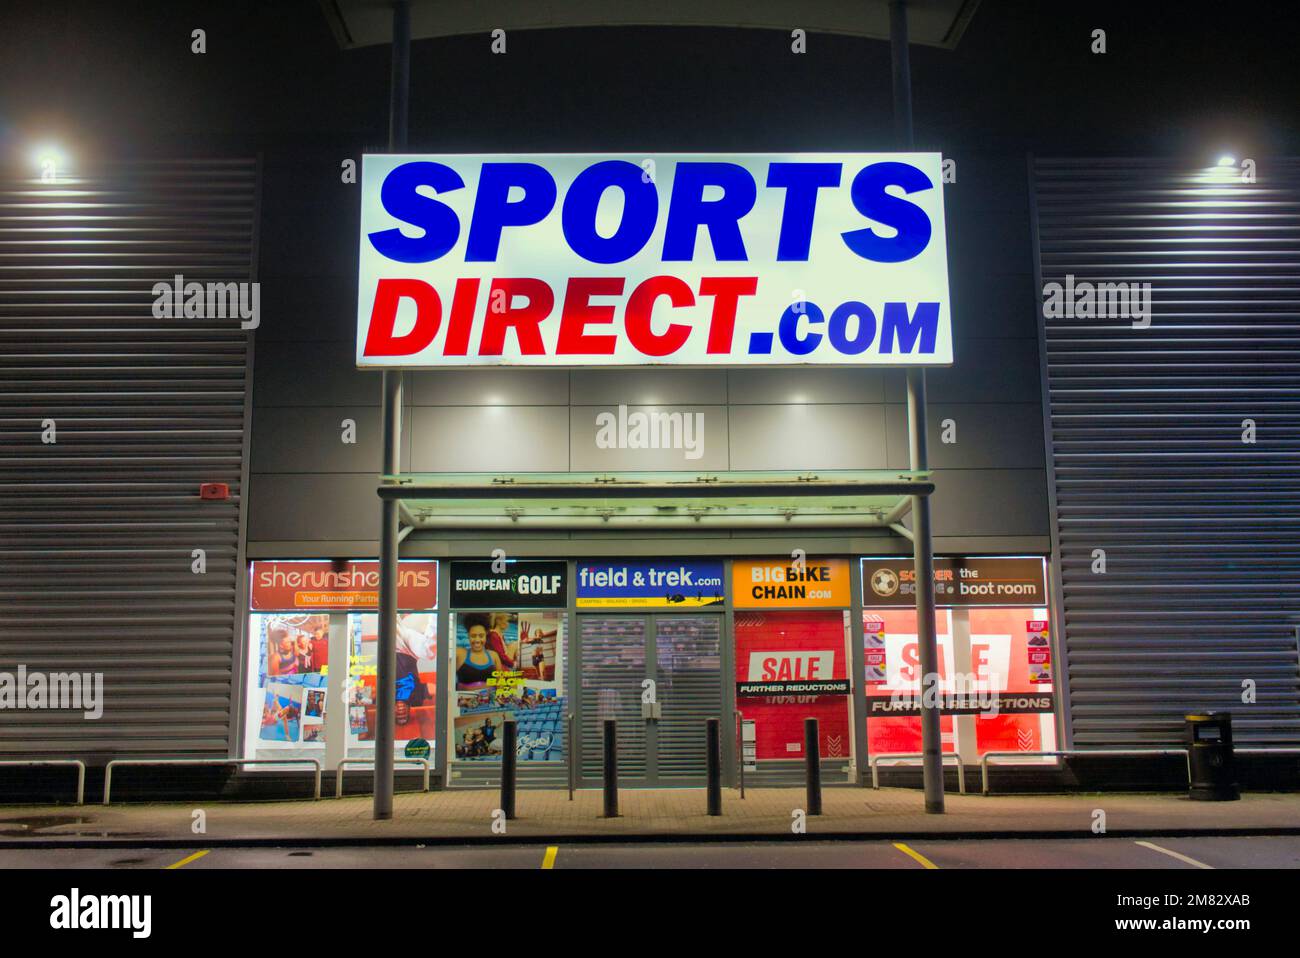 sports direct .com shop sign above front entrance at night with no people  Clyde Retail Park, Livingston Street, Clydebank Stock Photo